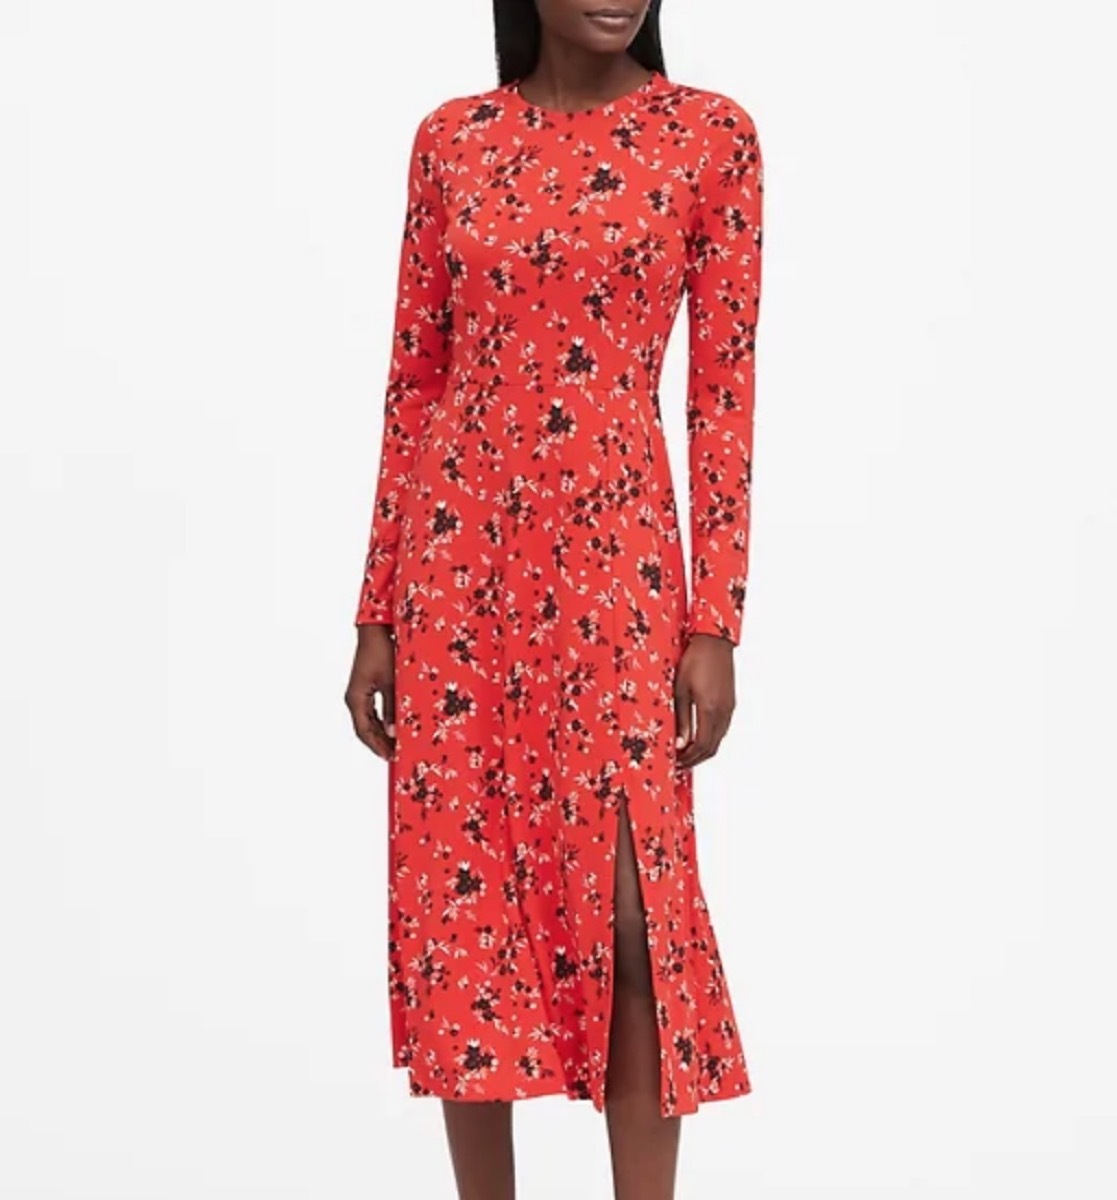 young black woman in red floral dress